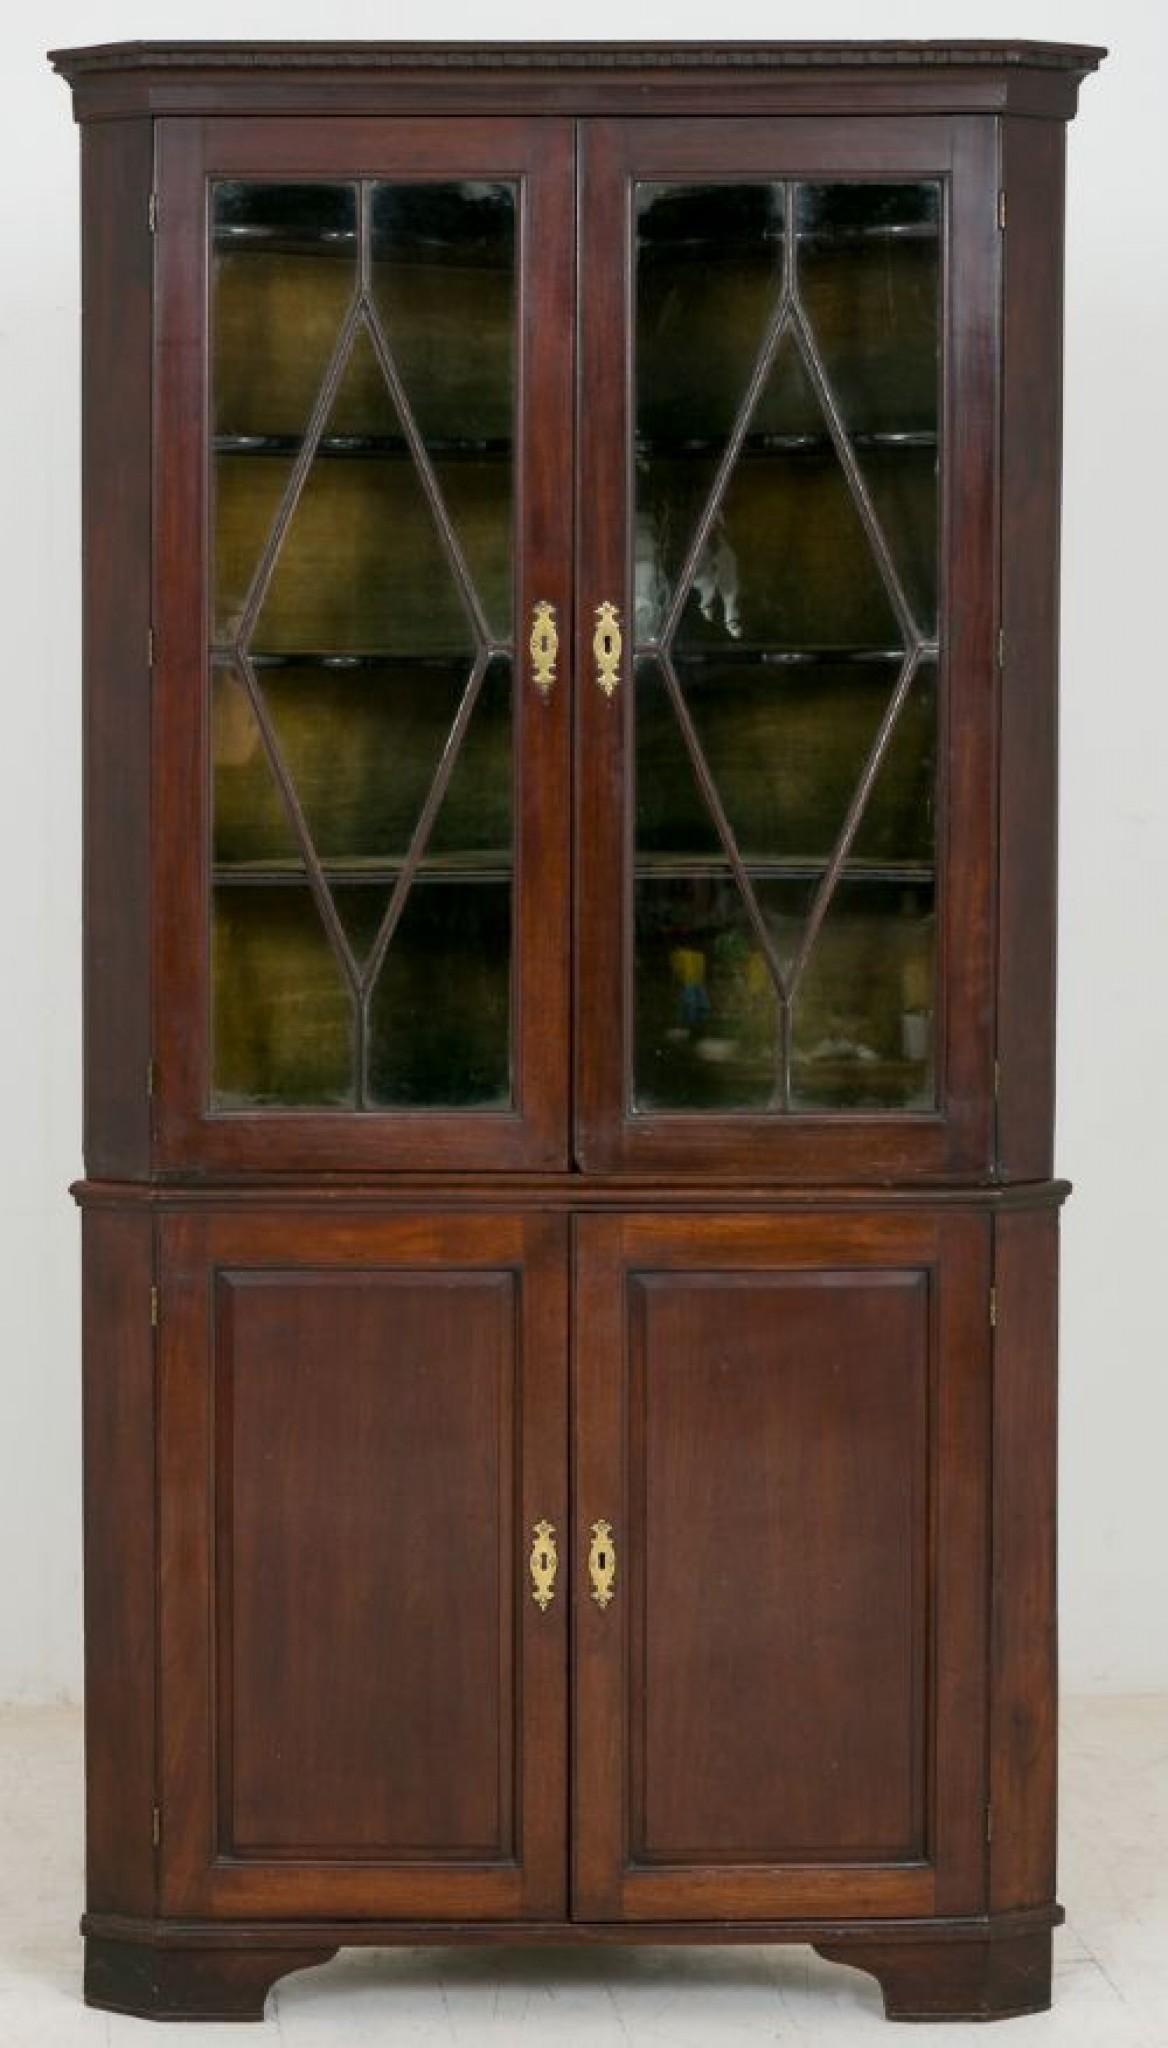 George II Mahogany Glazed Corner Cabinet.
circa 1750
Standing on bracket feet, featuring 2 fielded panel doors on the bottom section, the top section having a pair of astragal glazed doors revealing wonderful shaped shelves (typically early